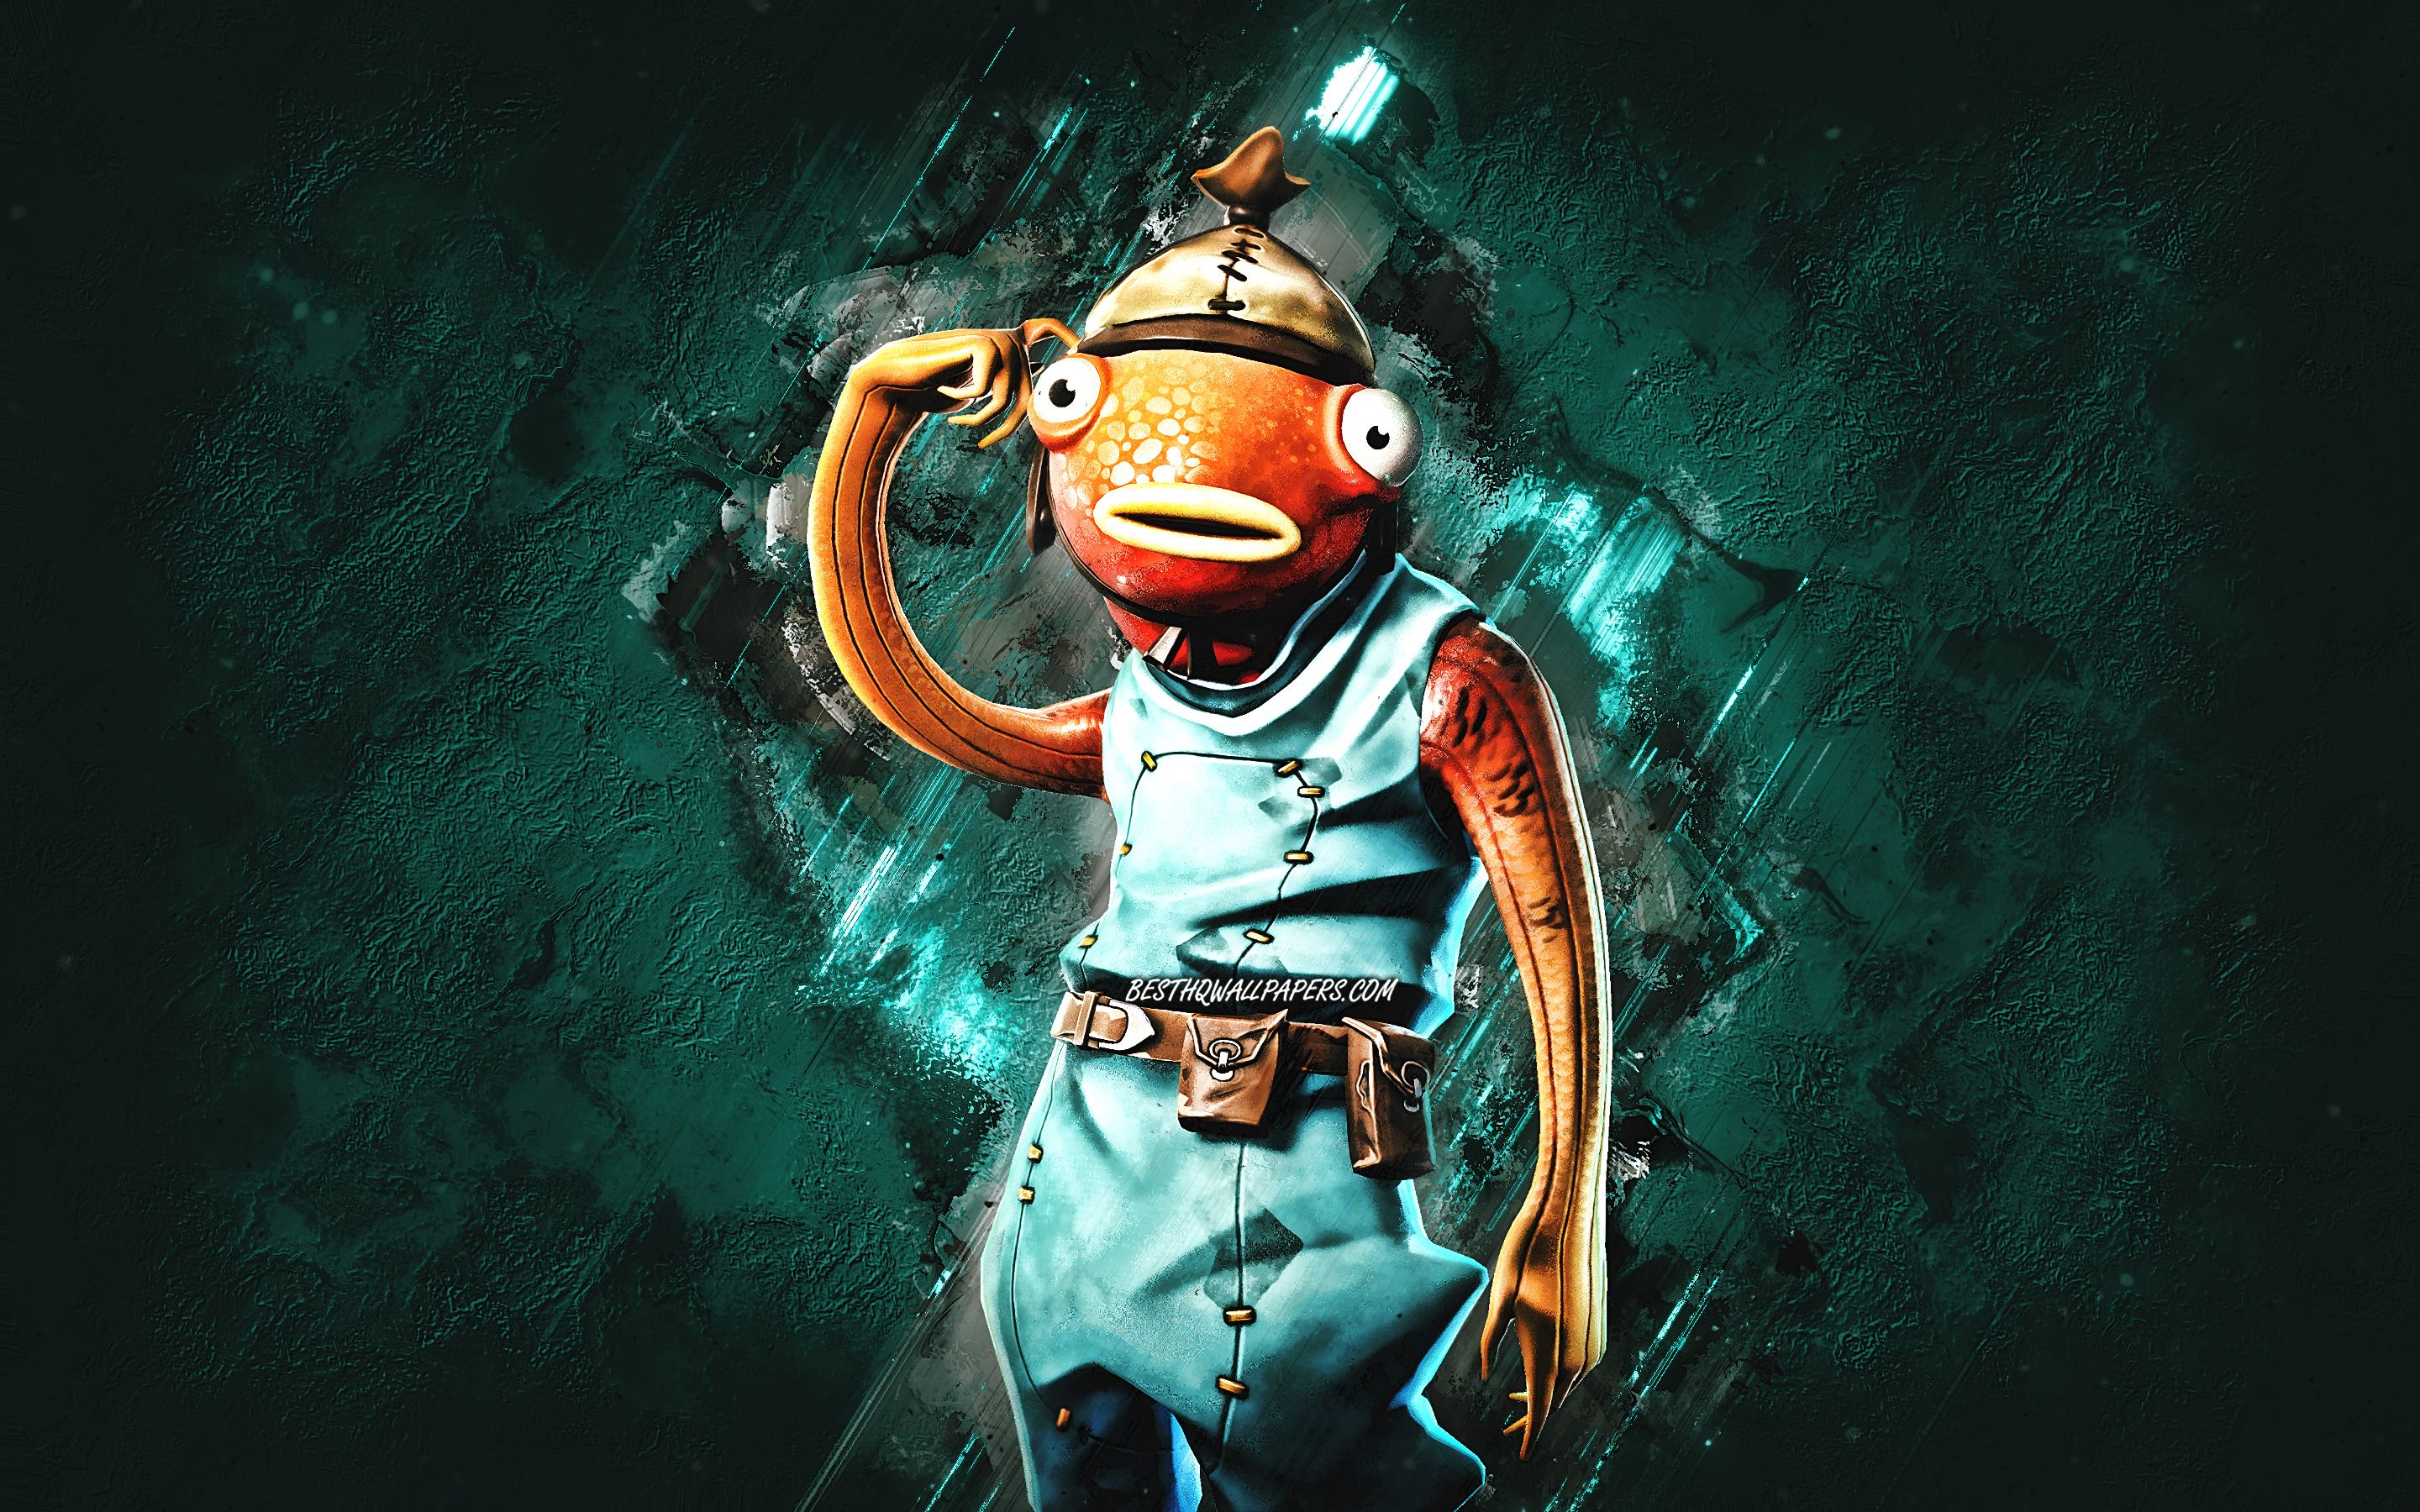 Download wallpaper Fortnite Fishstick Skin, Fortnite, main characters, turquoise stone background, Fishstick, Fortnite skins, Fishstick Skin, Fishstick Fortnite, Fortnite characters for desktop with resolution 2880x1800. High Quality HD picture